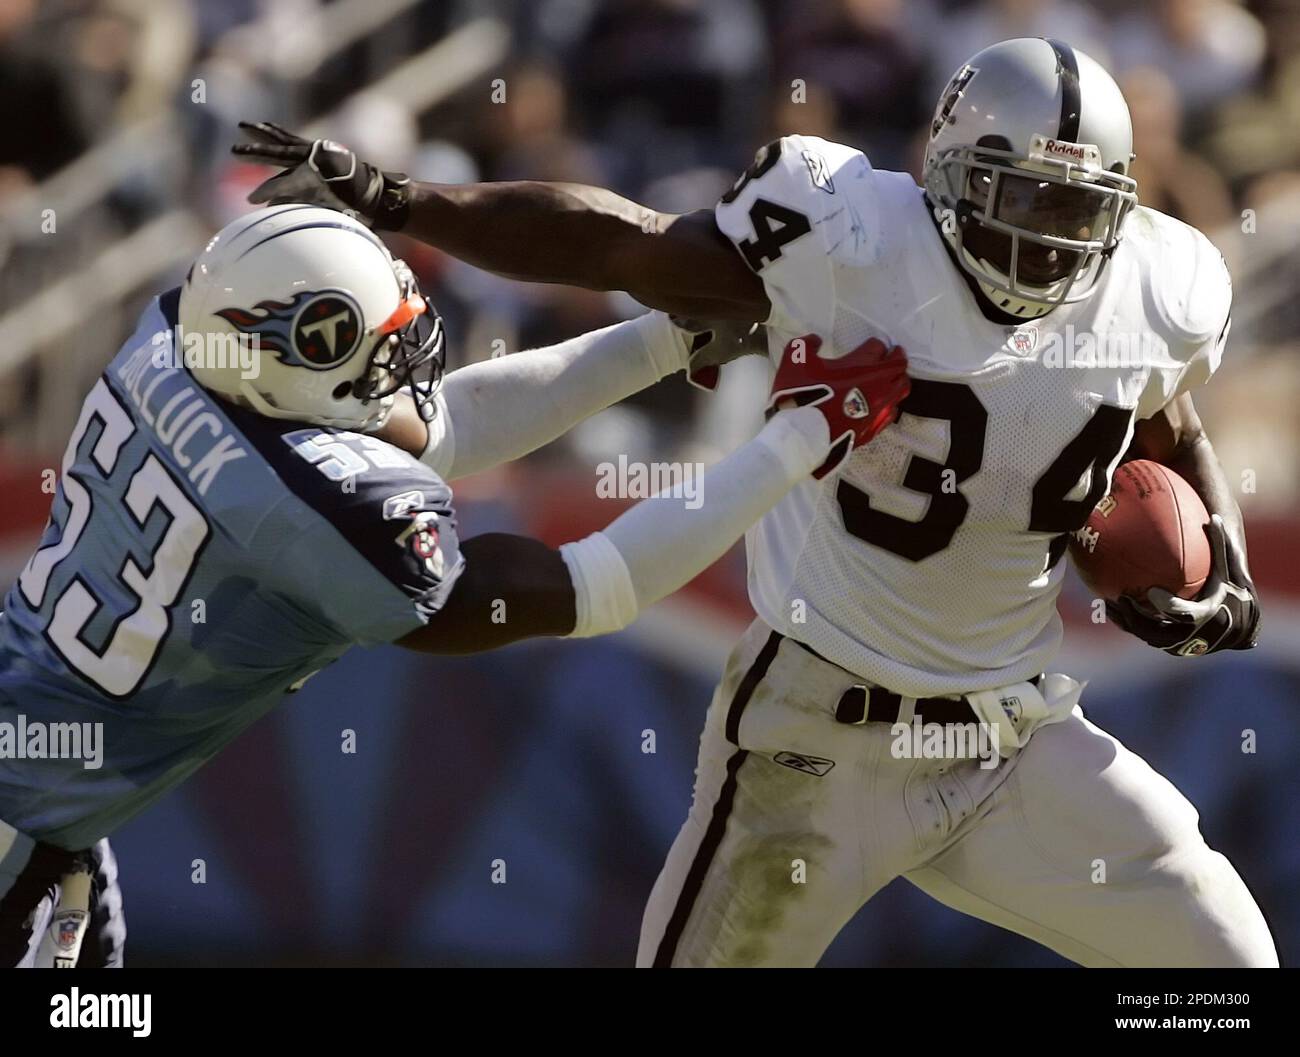 Oakland Raiders runningback LaMont Jordan (34) tries to escape from  Tennessee Titans linebacker Keith Bulluck (53) in the first quarter in  Nashville, Tenn., on Sunday, Oct. 30, 2005. (AP Photo/Mark Humphrey Stock  Photo - Alamy